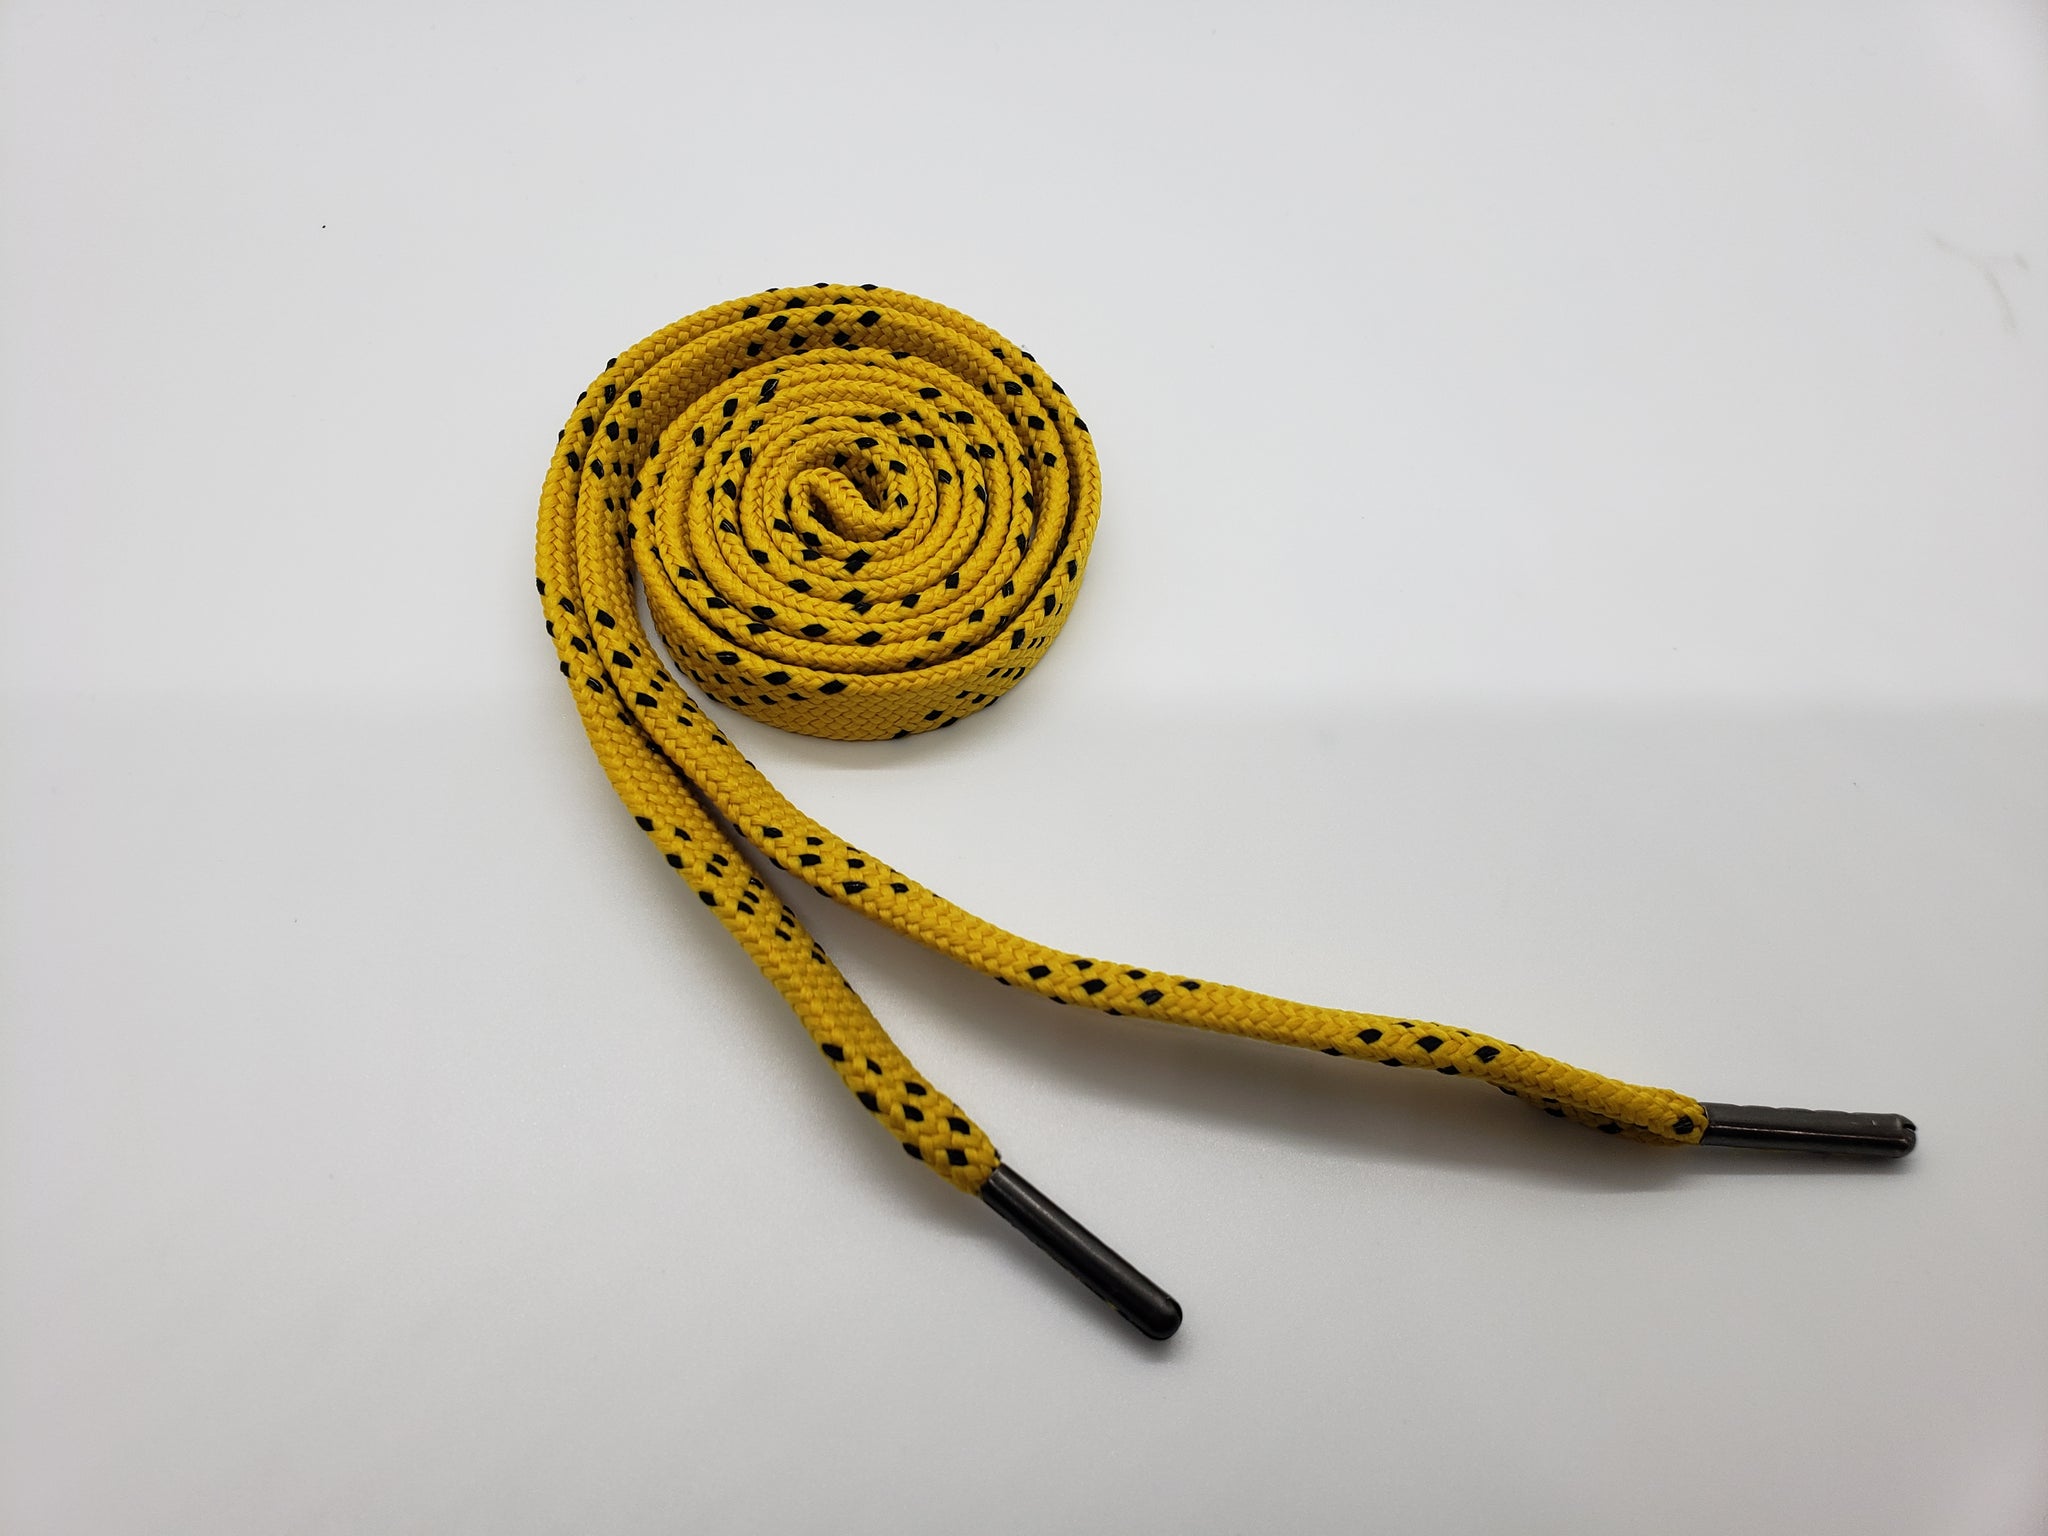 A roll of our yellow and black premium sport laces.